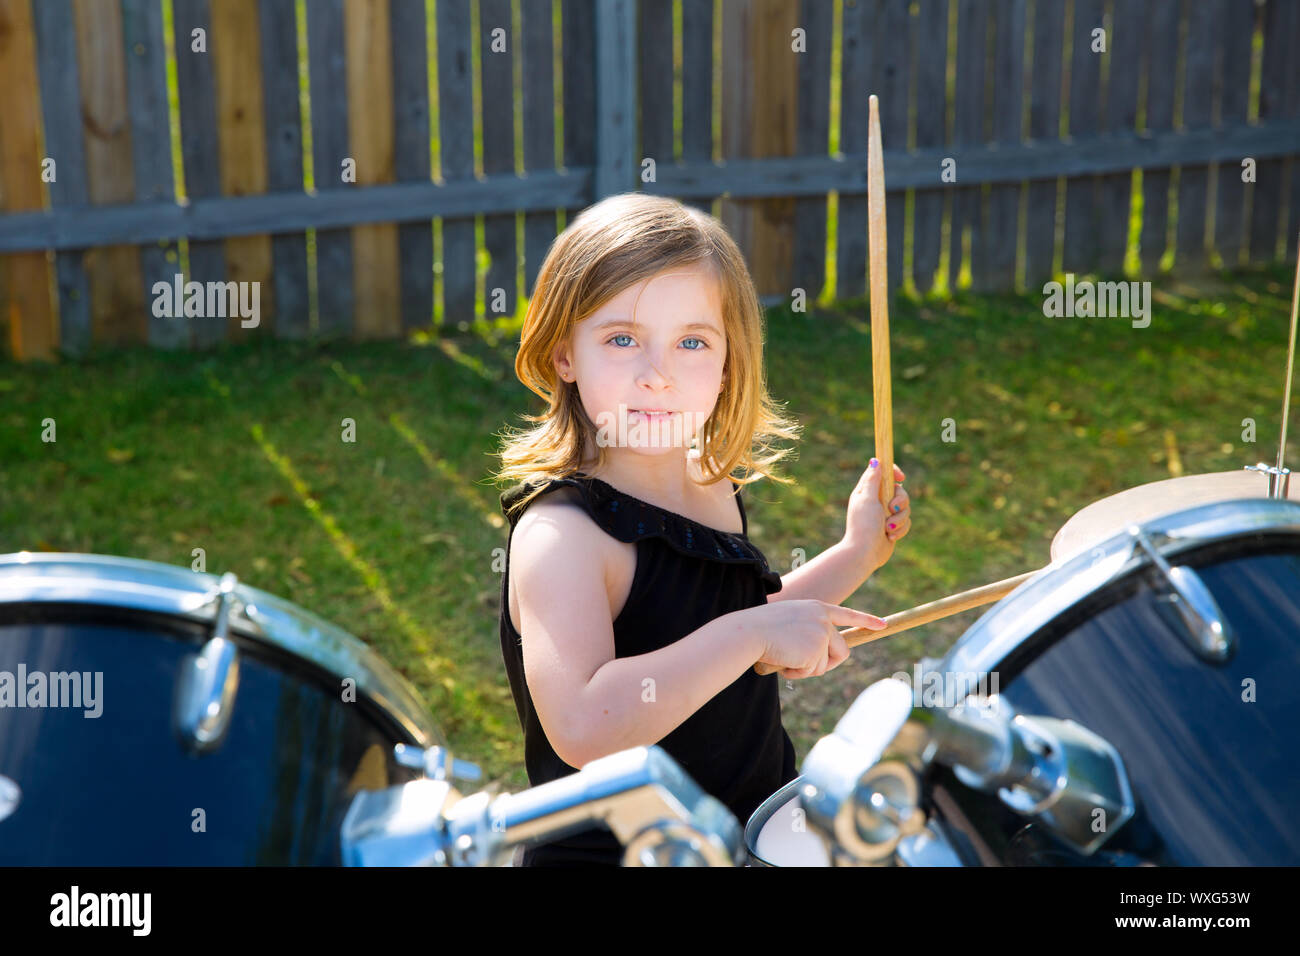 Drummer blond kid girl playing drums in tha backyard lawn Stock Photo